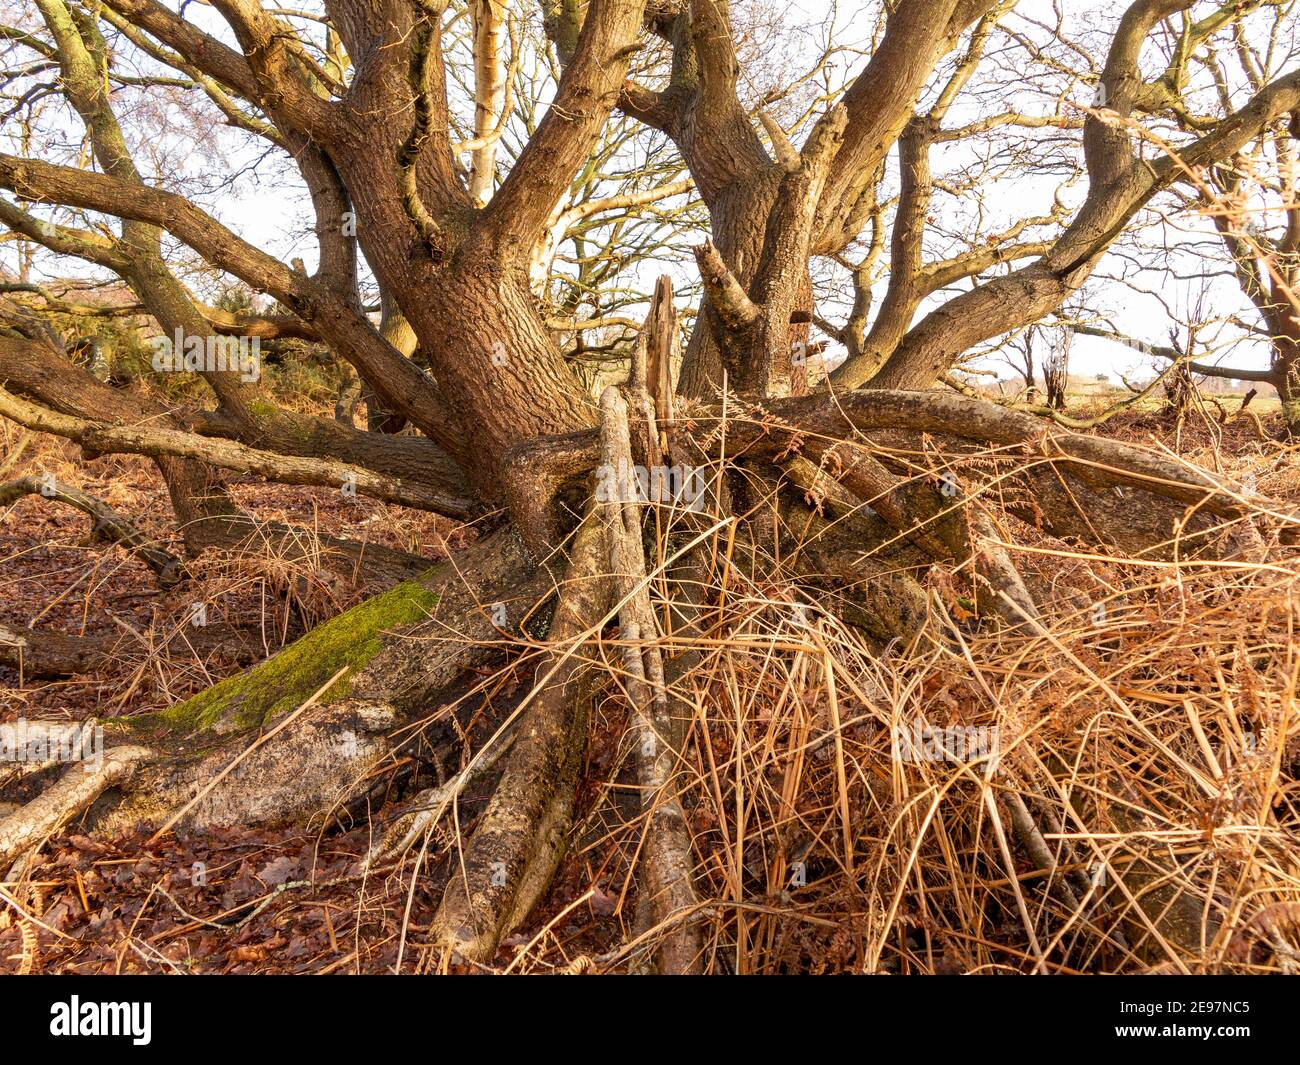 A fallen tree taken from the pulled up root end in winter with no leaves Stock Photo